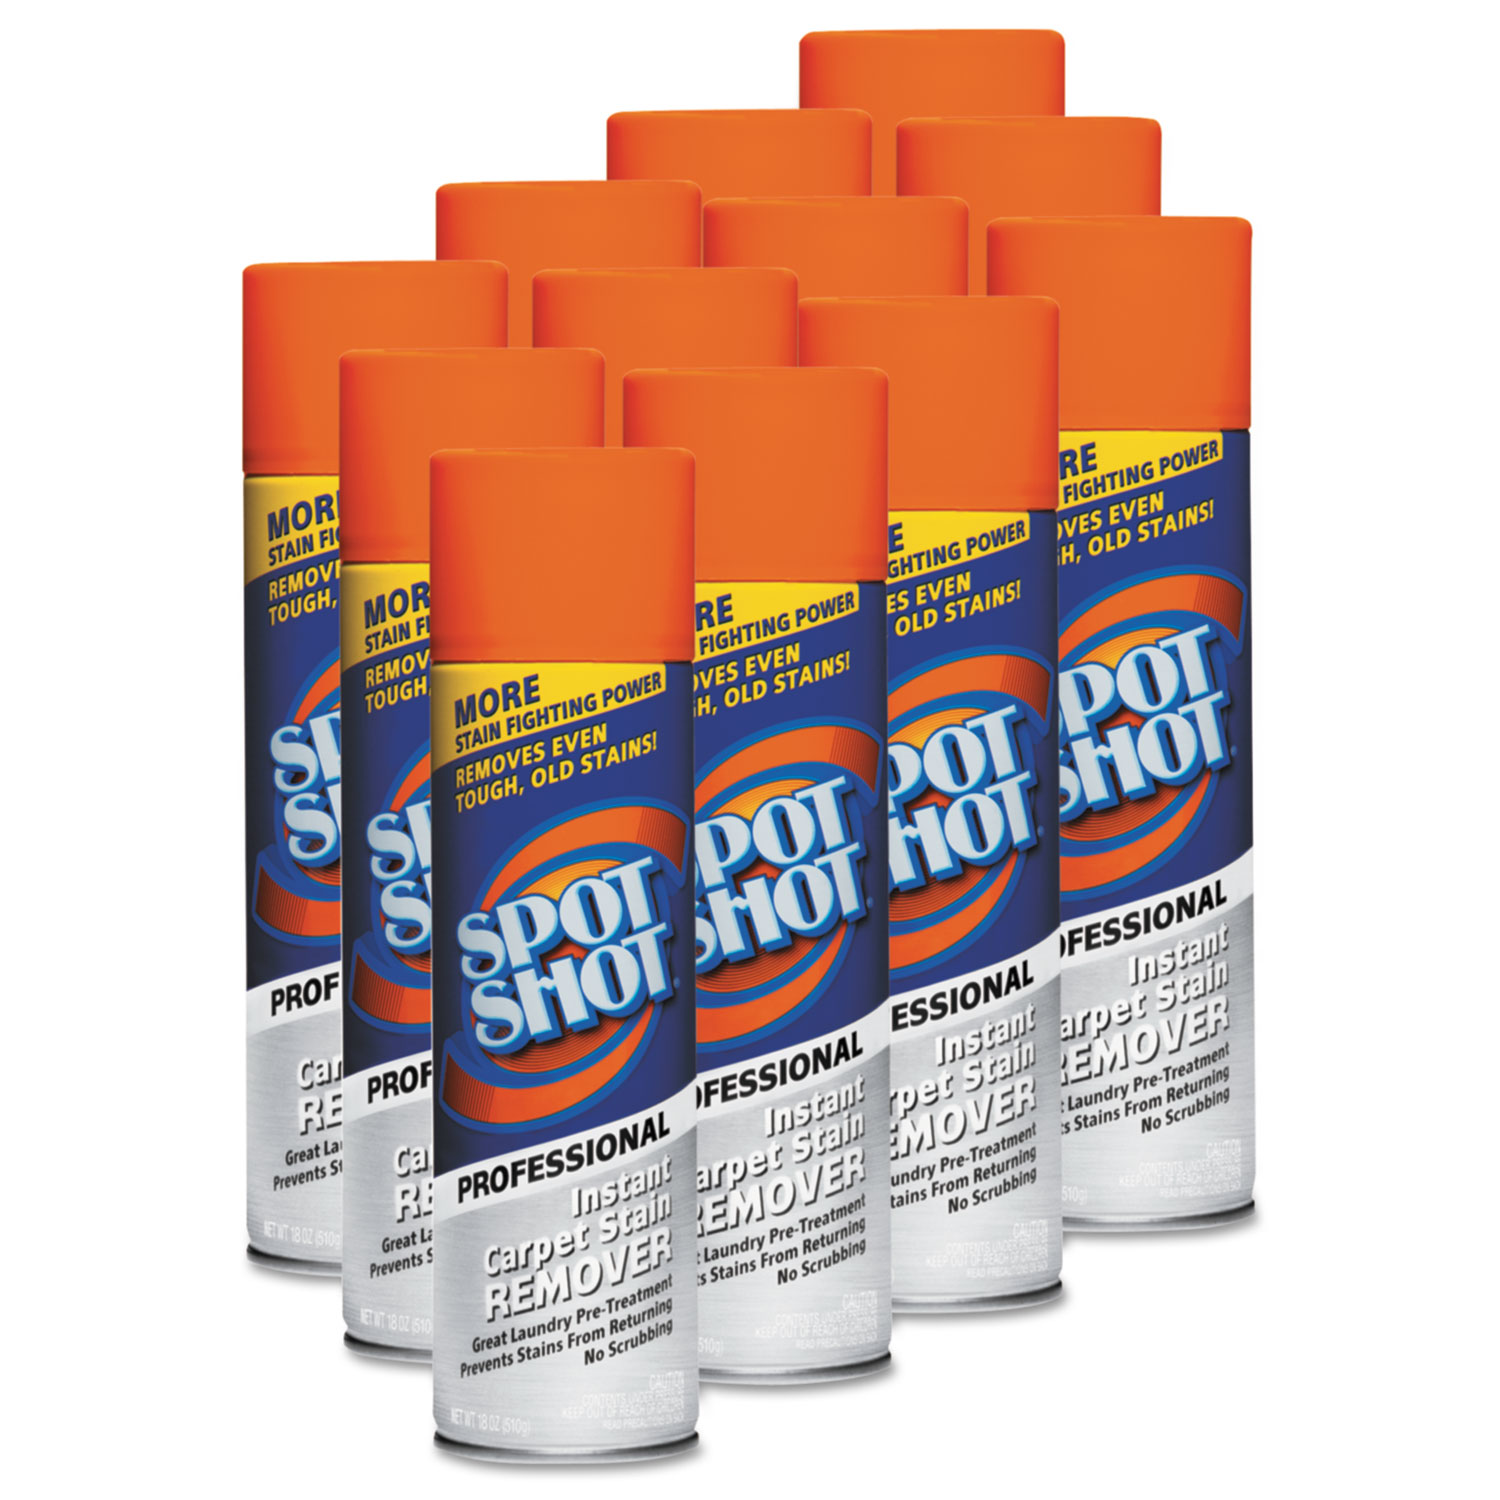 Spot Shot Professional Instant Carpet Stain Remover, 18oz Spray Can, 12/Carton